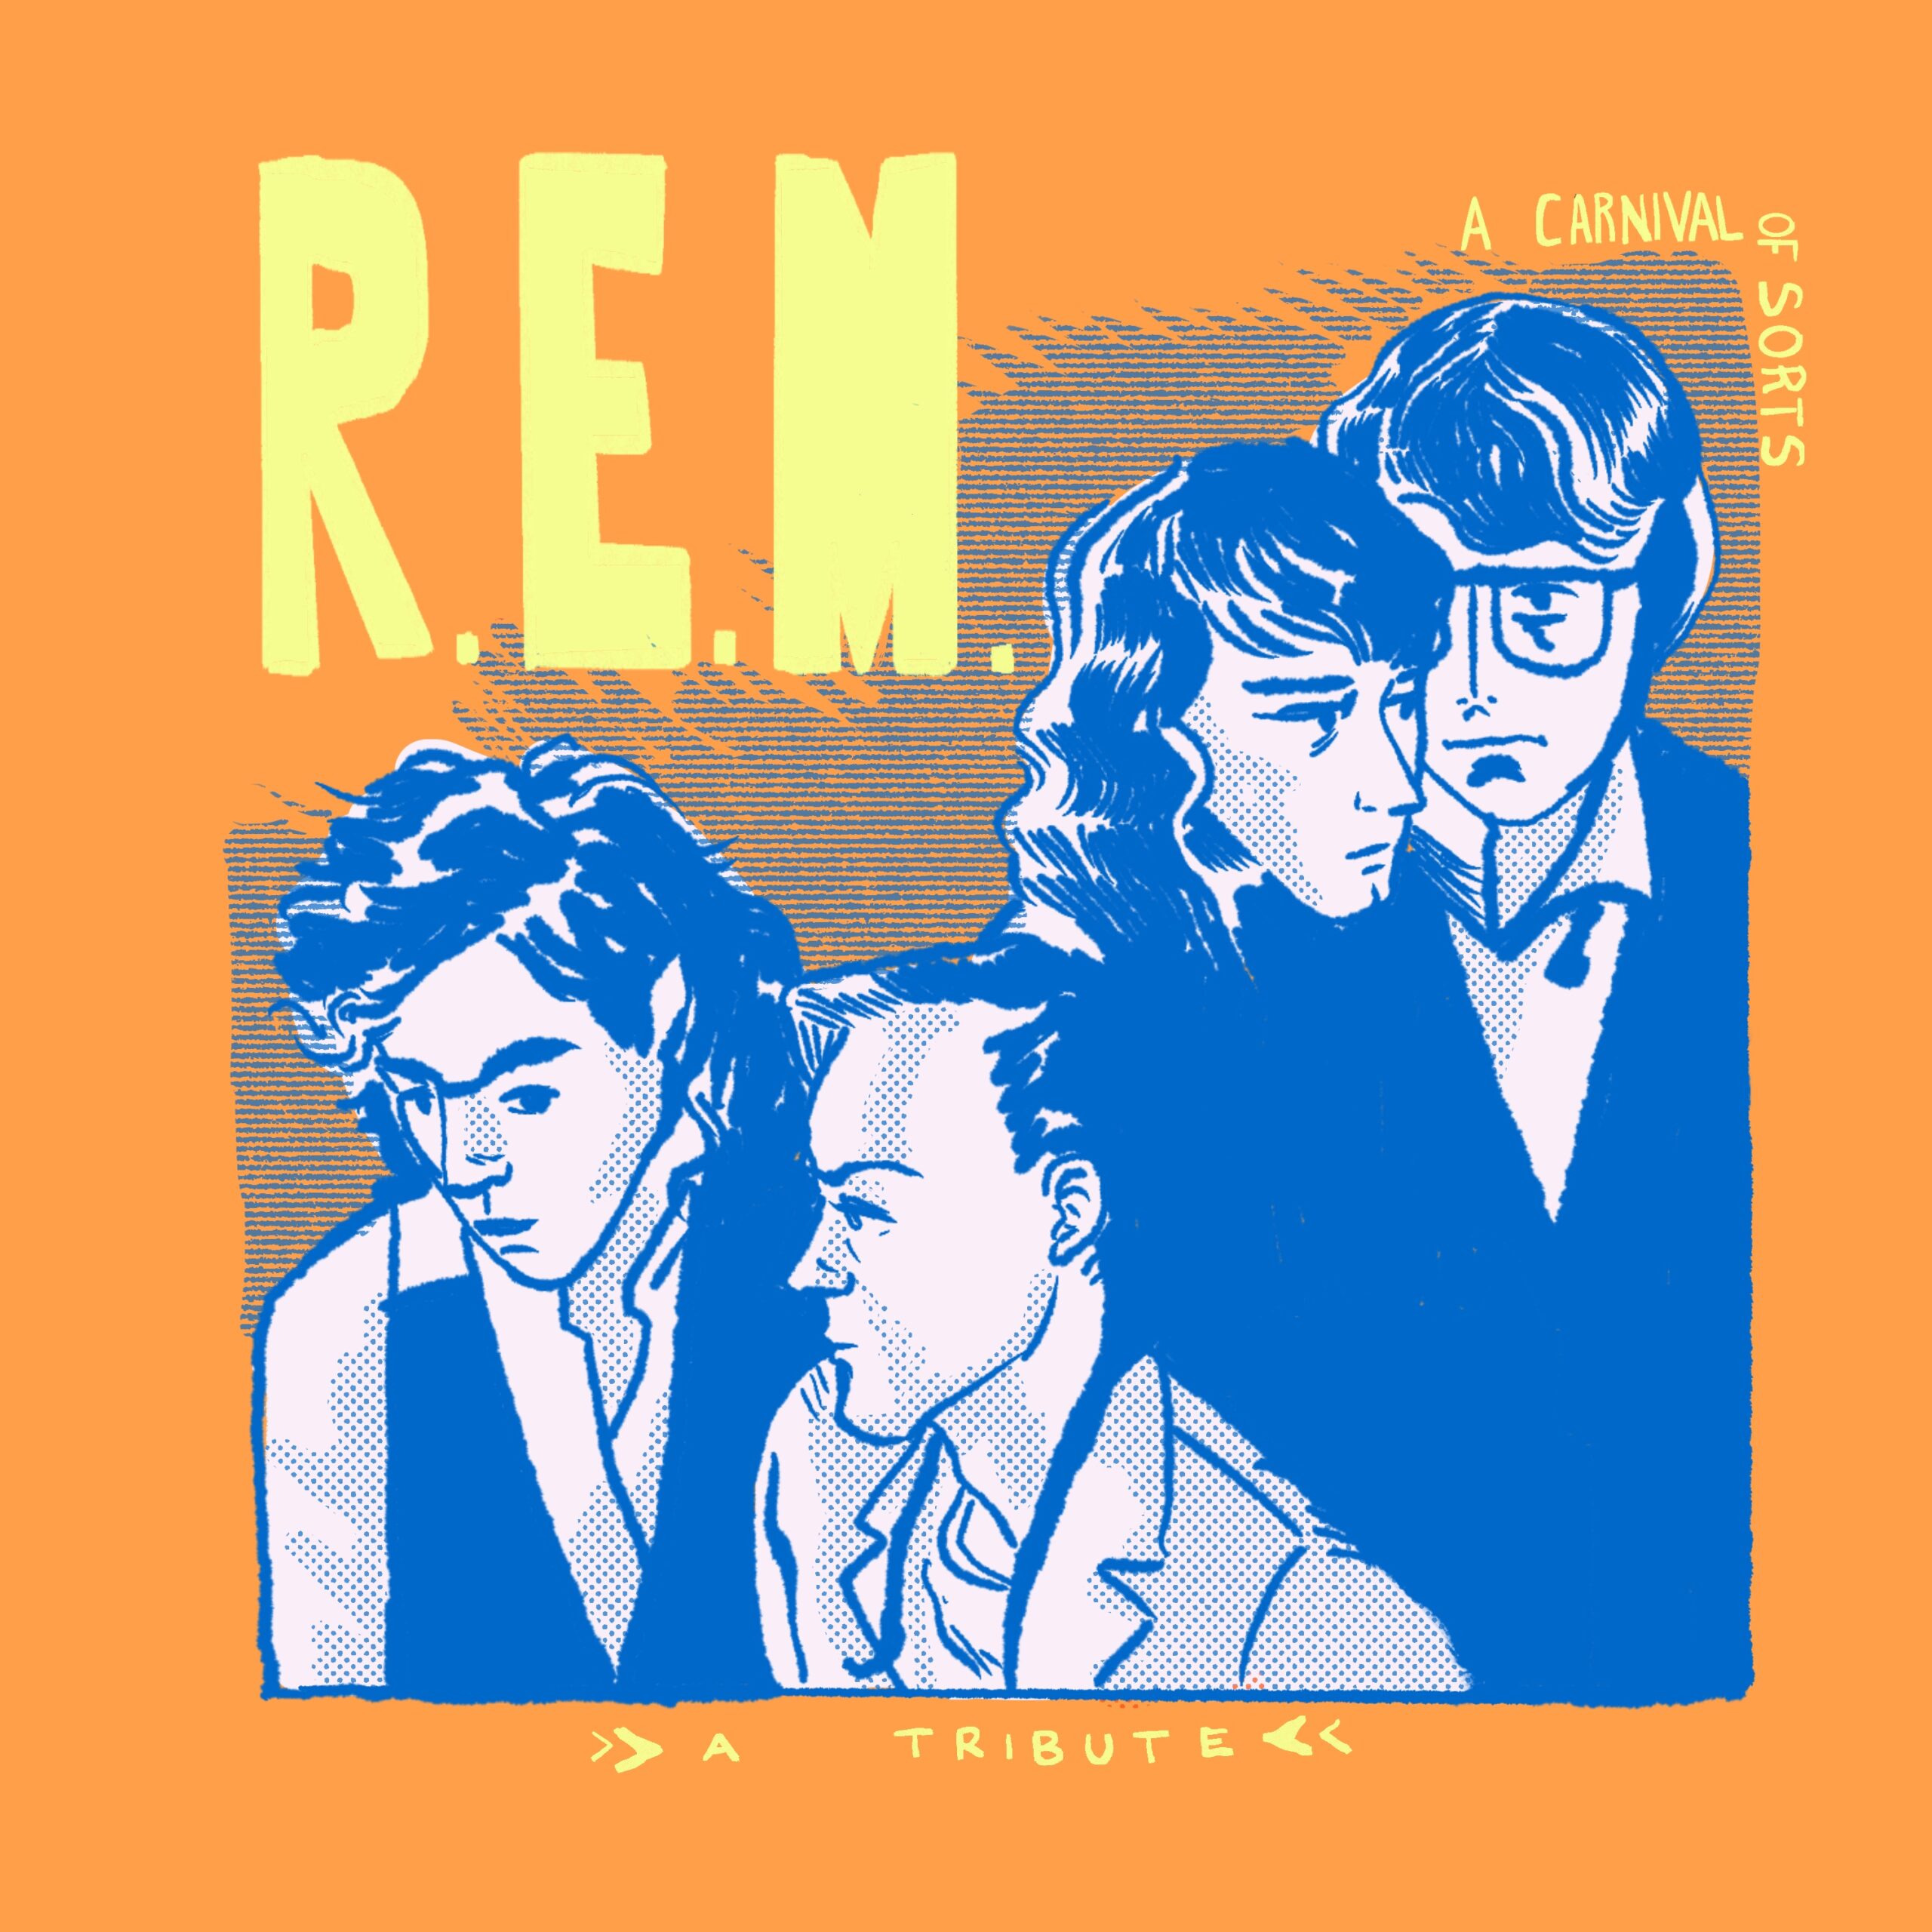 EXCLUSIVE STREAM:  A Carnival of Sorts: A compilation of R.E.M. covers by Various Artists